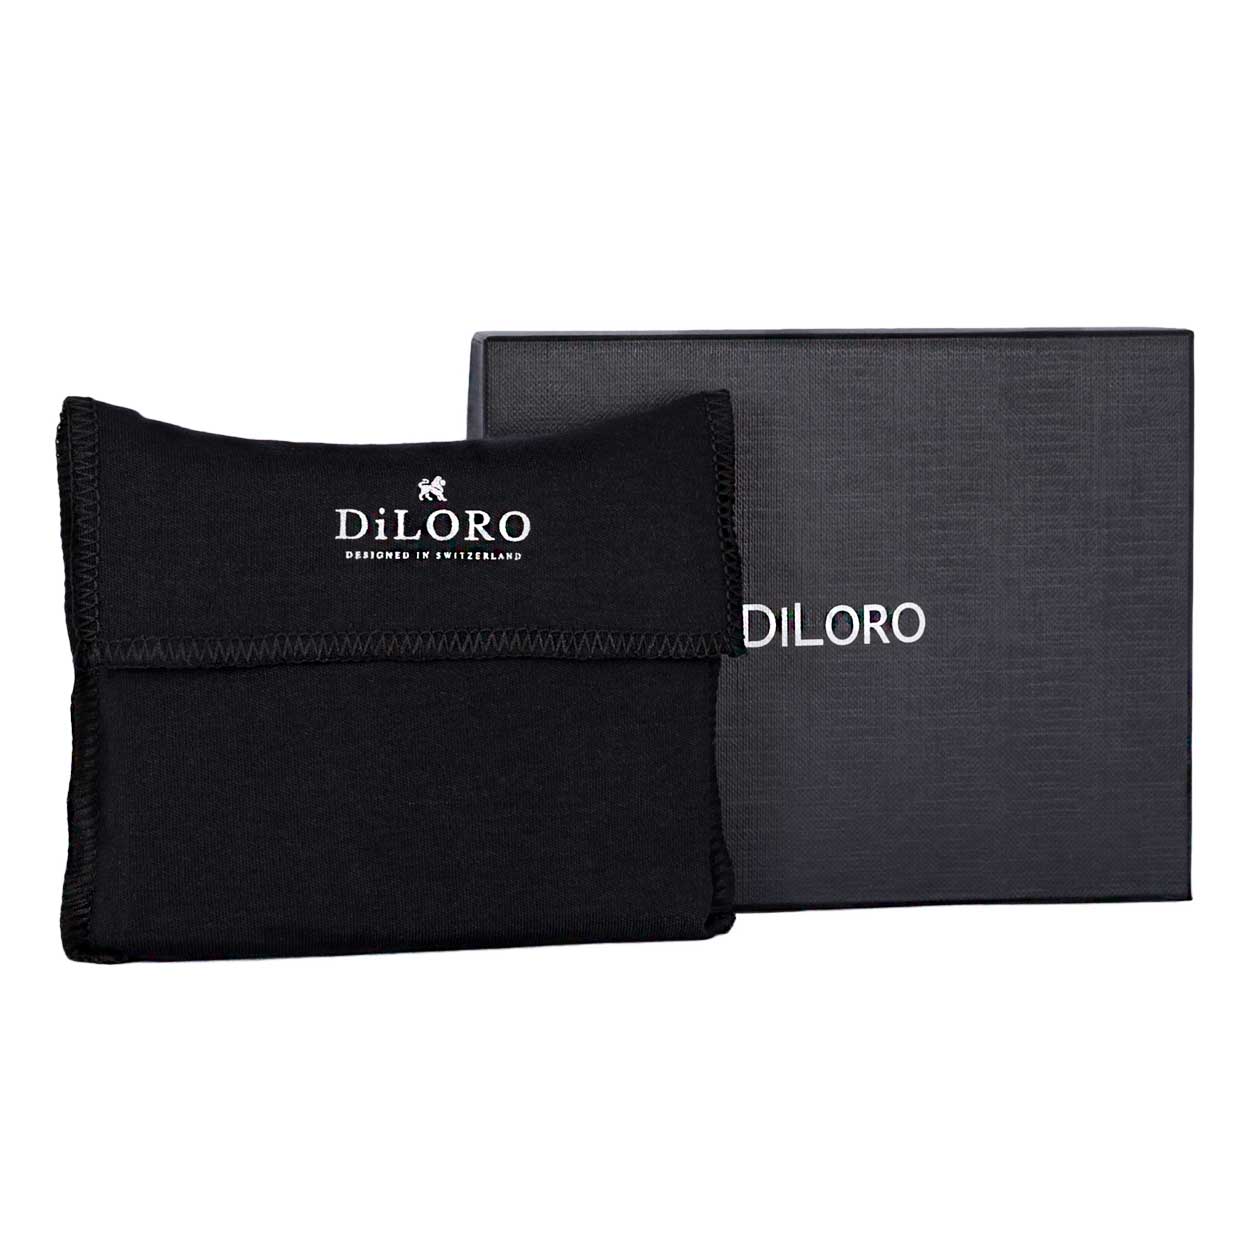 DiLoro Italy Men's Leather Wallet RFID Blocking Genuine Full Grain, Vegetable Tanned Leather, Bifold Flip Coin Wallet, Dark Hunter Brown - DIloro Gift Box and Dust Bag